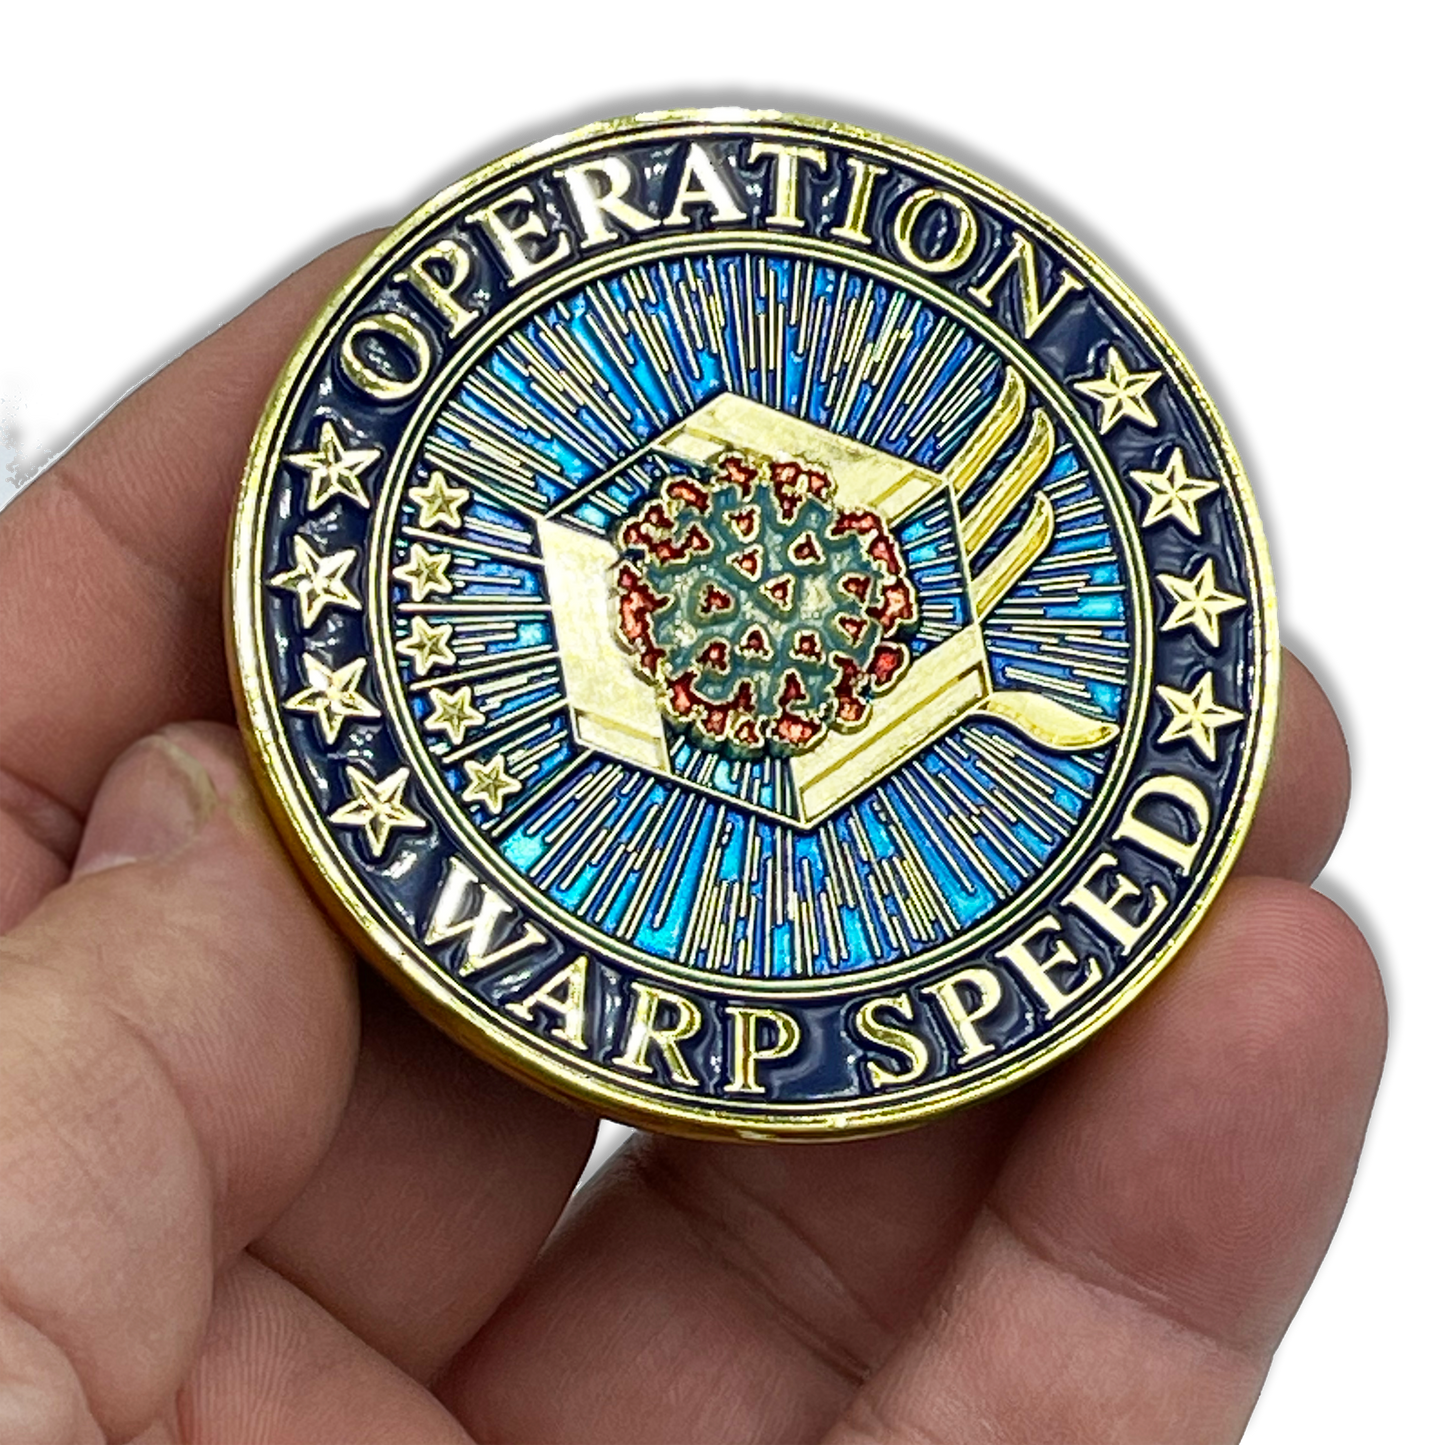 CL4-01 Operation Warp Speed Challenge Coin Baby Formula Shortage Task Force Department of Agriculture HHS CDC